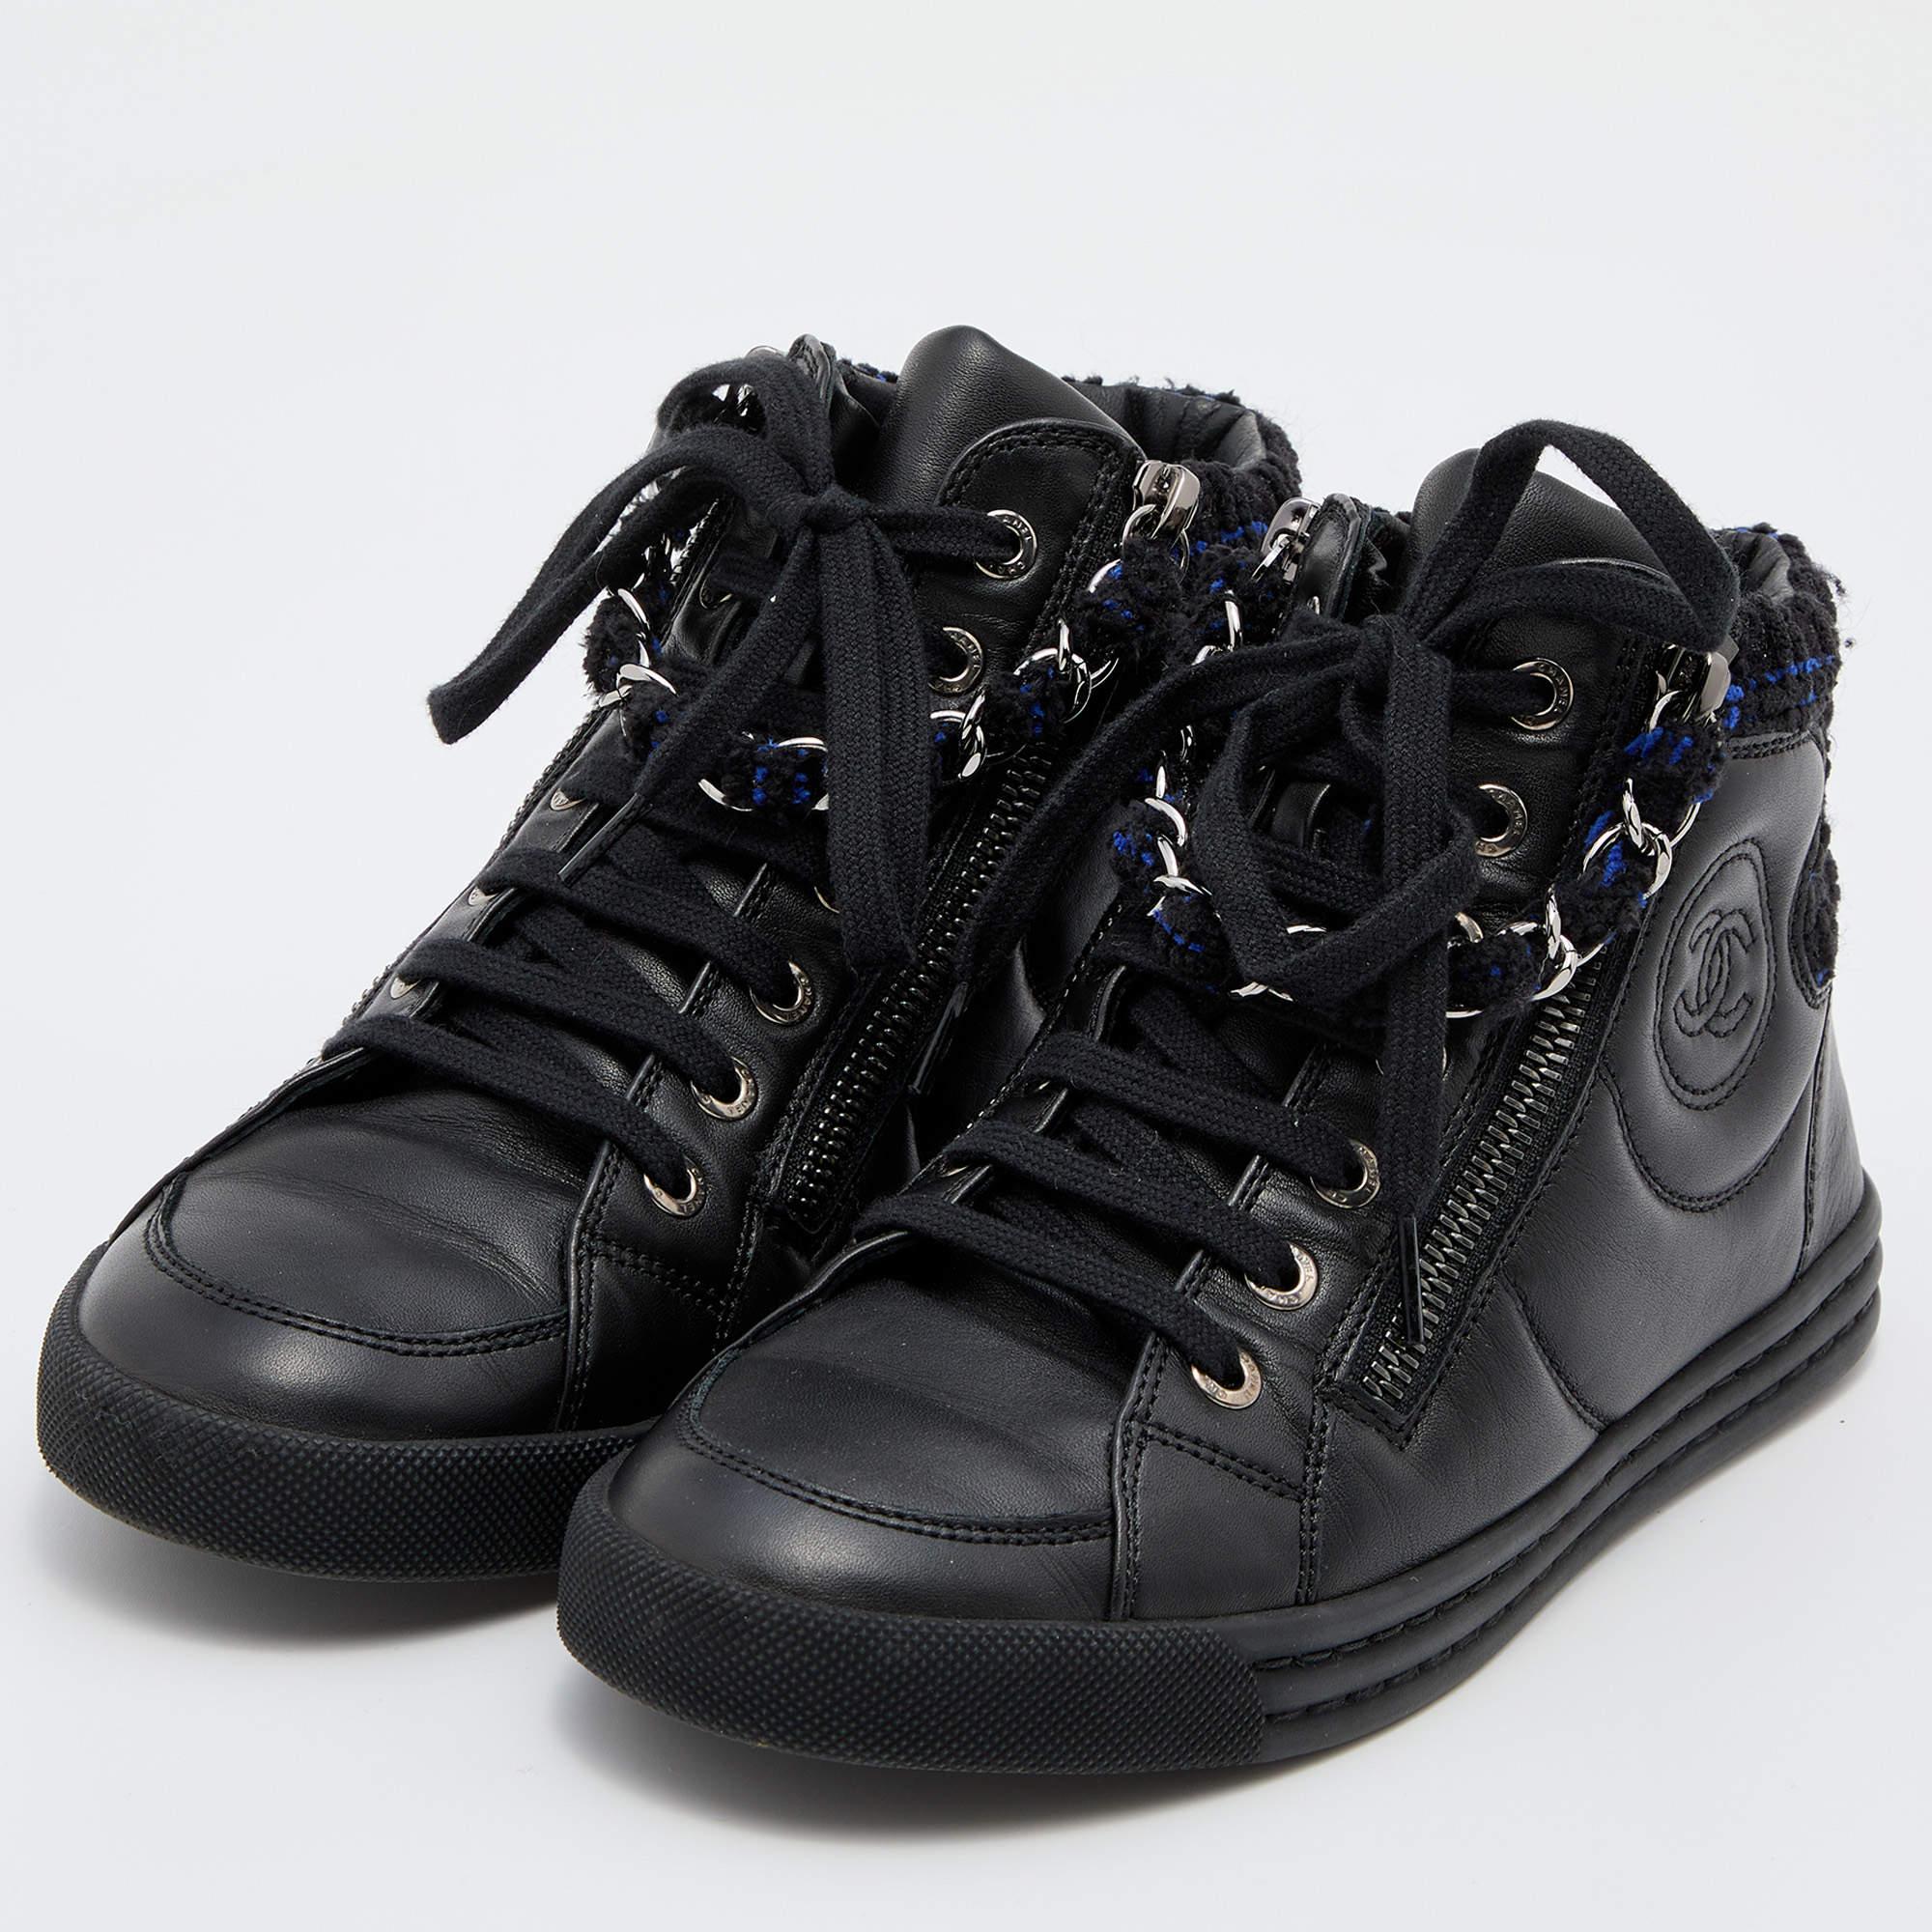 Women's Chanel Black Leather CC Chain Link High Top Sneakers Size 35